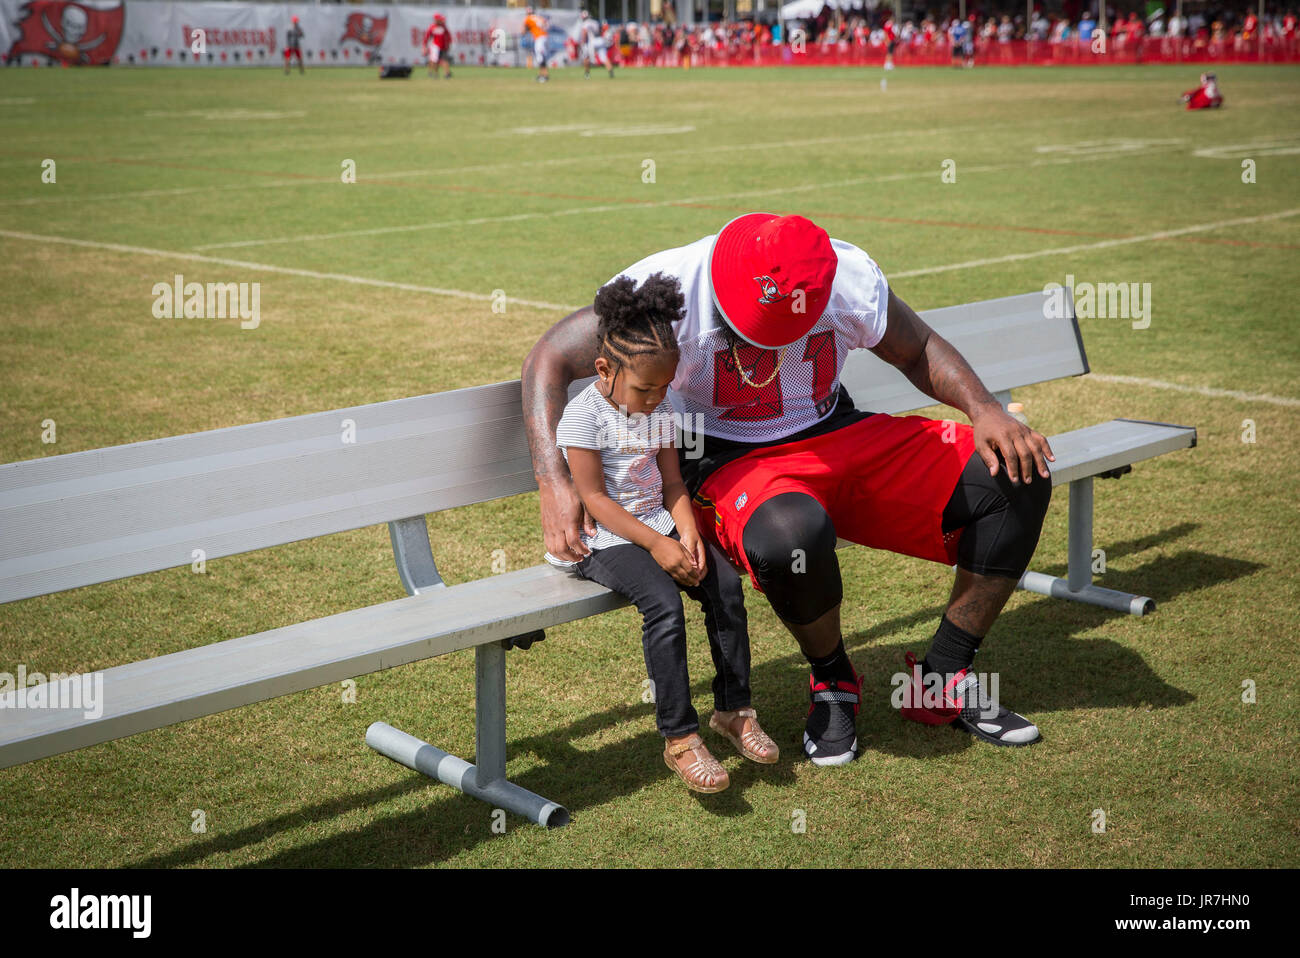 Florida, USA. 4th Aug, 2017. LOREN ELLIOTT | Times .Tampa Bay Buccaneers defensive end Robert Ayers (91) sits with daughter Brailyn, 3, after practice during training camp at One Buccaneer Place in Tampa, Fla., on Friday, Aug. 4, 2017. Credit: Loren Elliott/Tampa Bay Times/ZUMA Wire/Alamy Live News Stock Photo